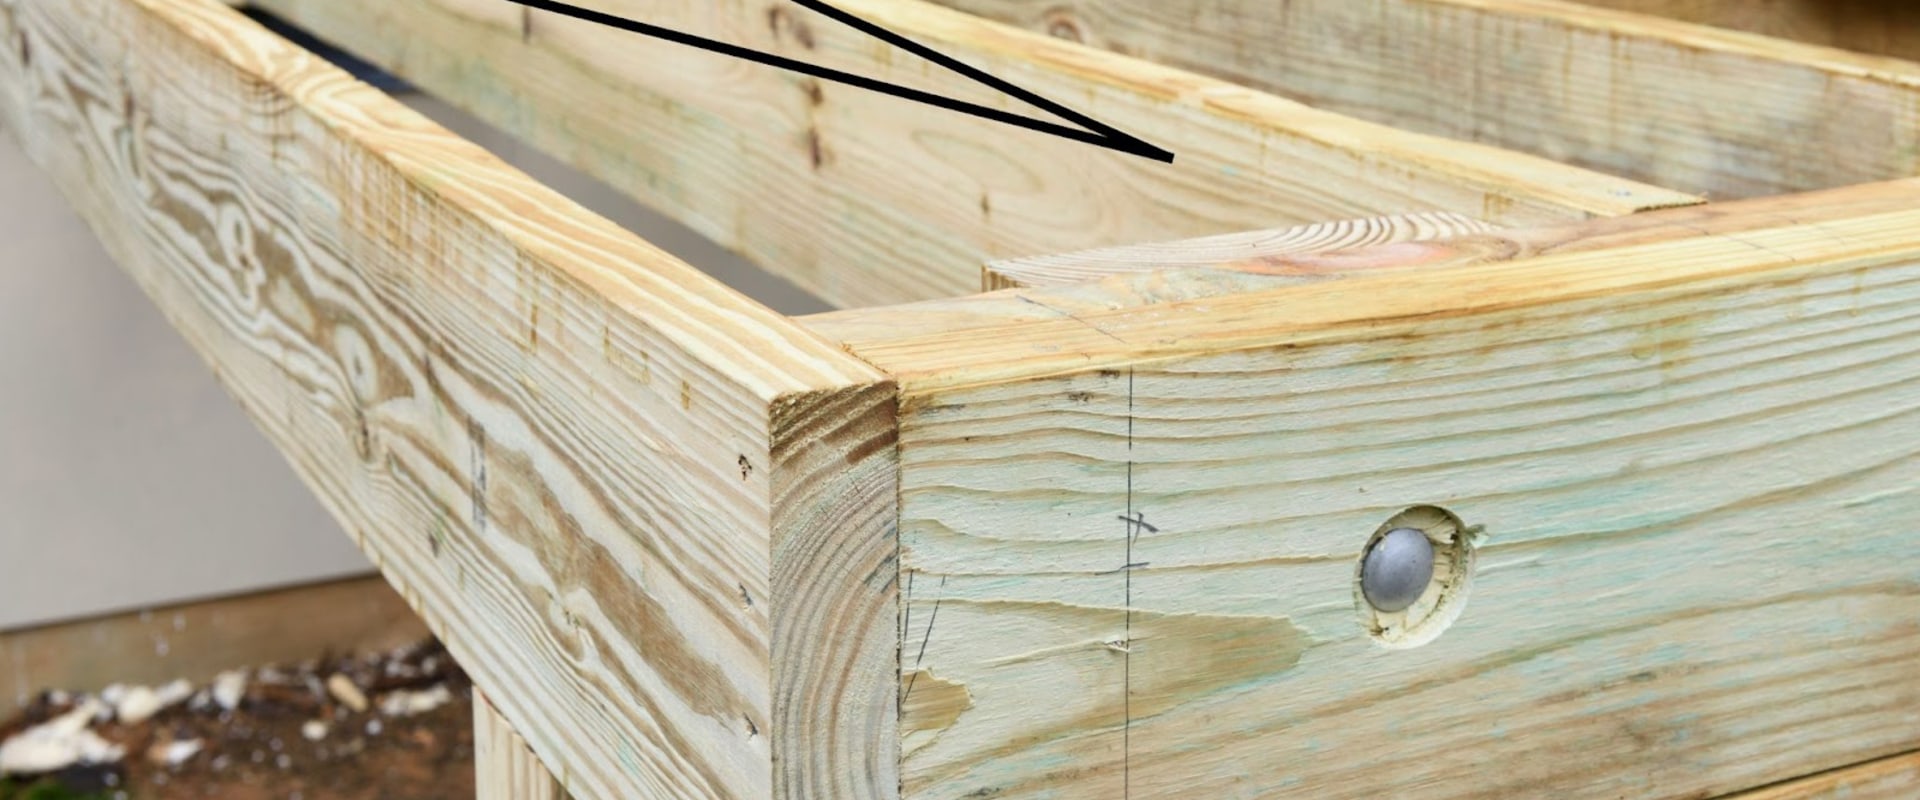 Can Deck Joists Be Placed on a Ledger Board? - A Comprehensive Guide